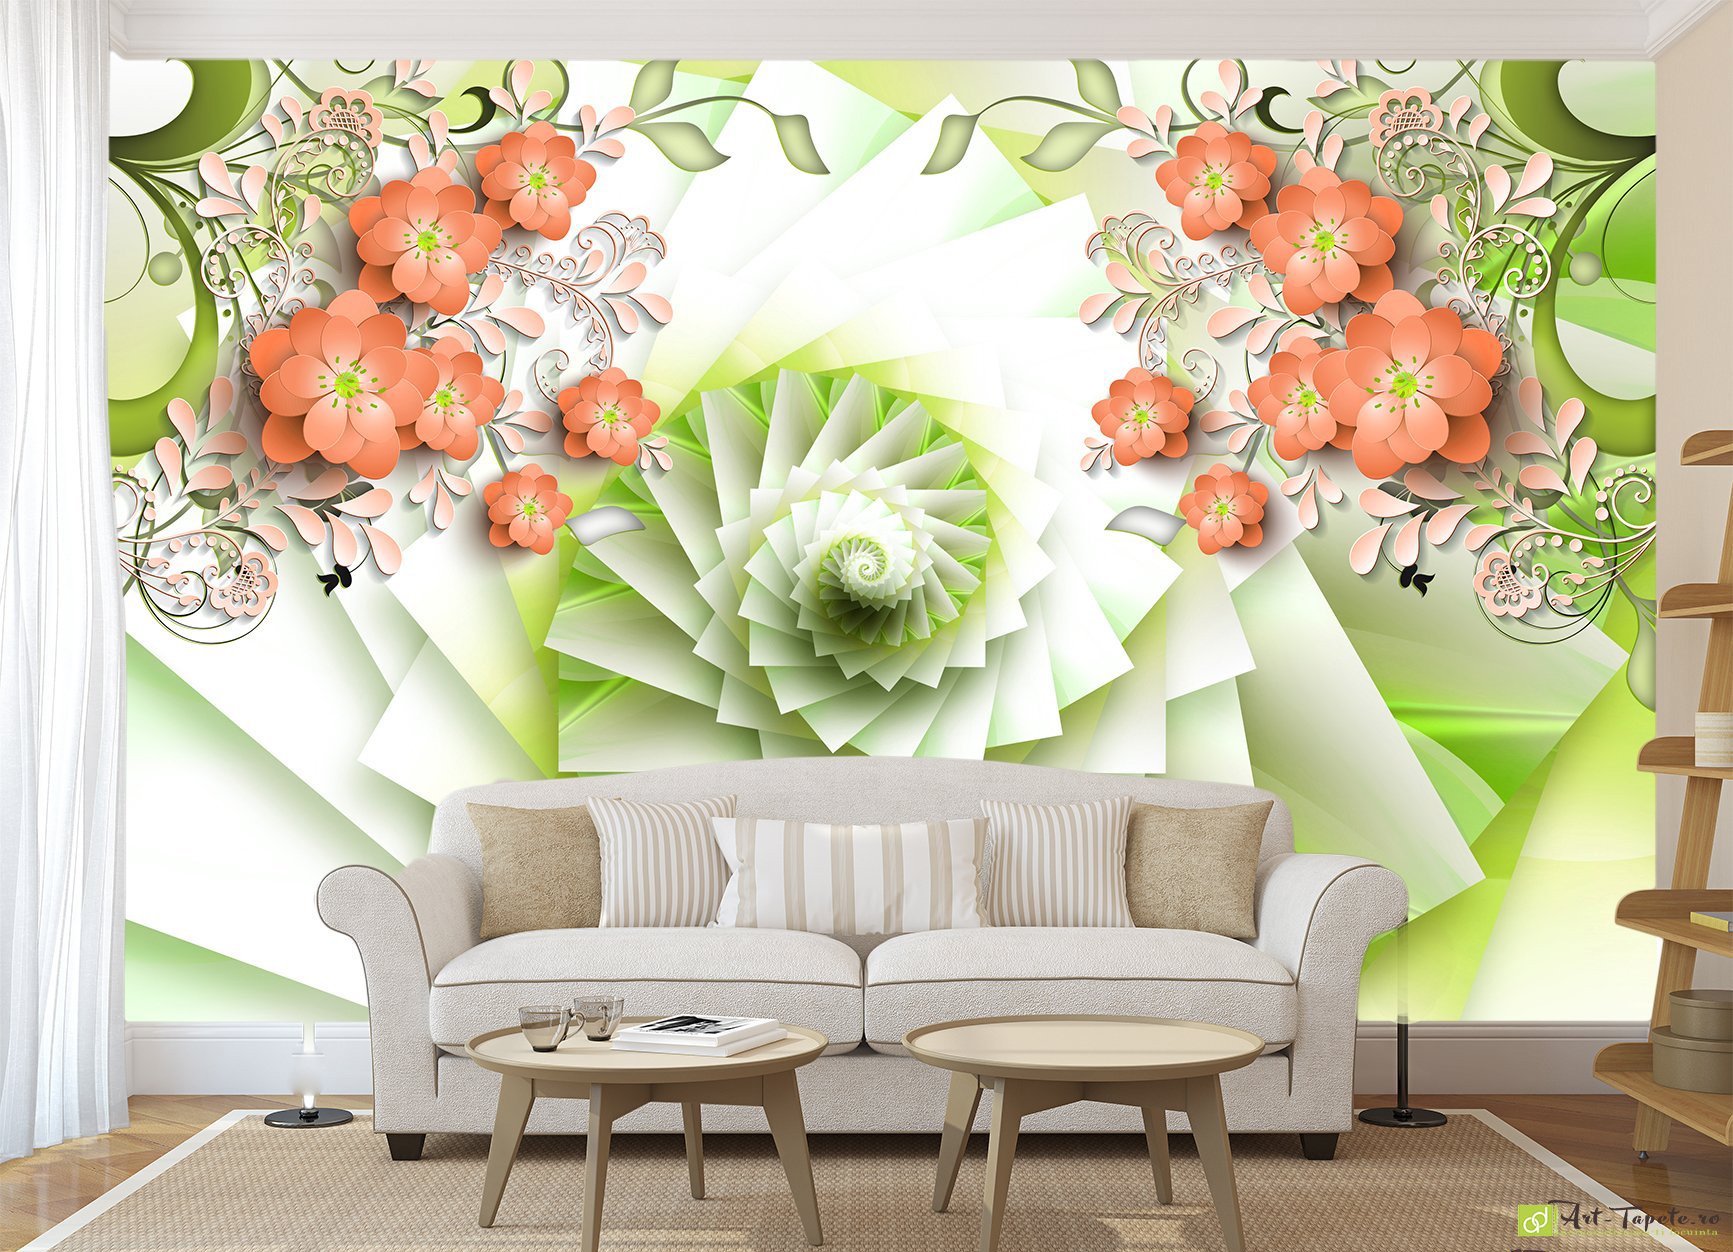 Photo Wallpaper 3D Effect - 3D loops and leaves_2   Eco-friendly 3D wall-paper on a wall for ordering online